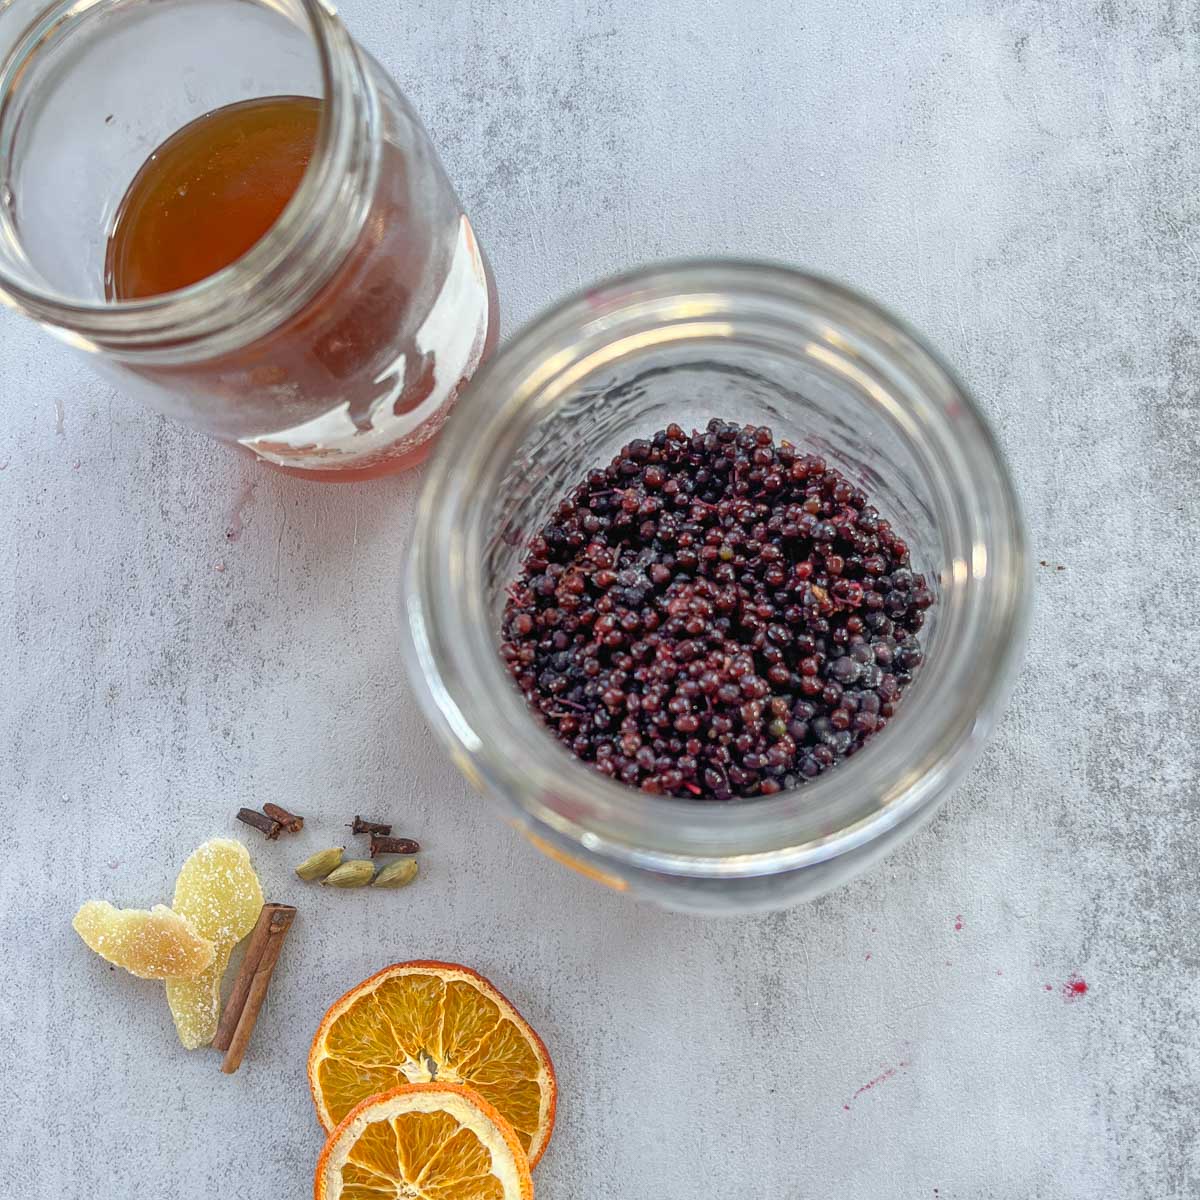 elderberries in a jar with spices and vinegar next to it